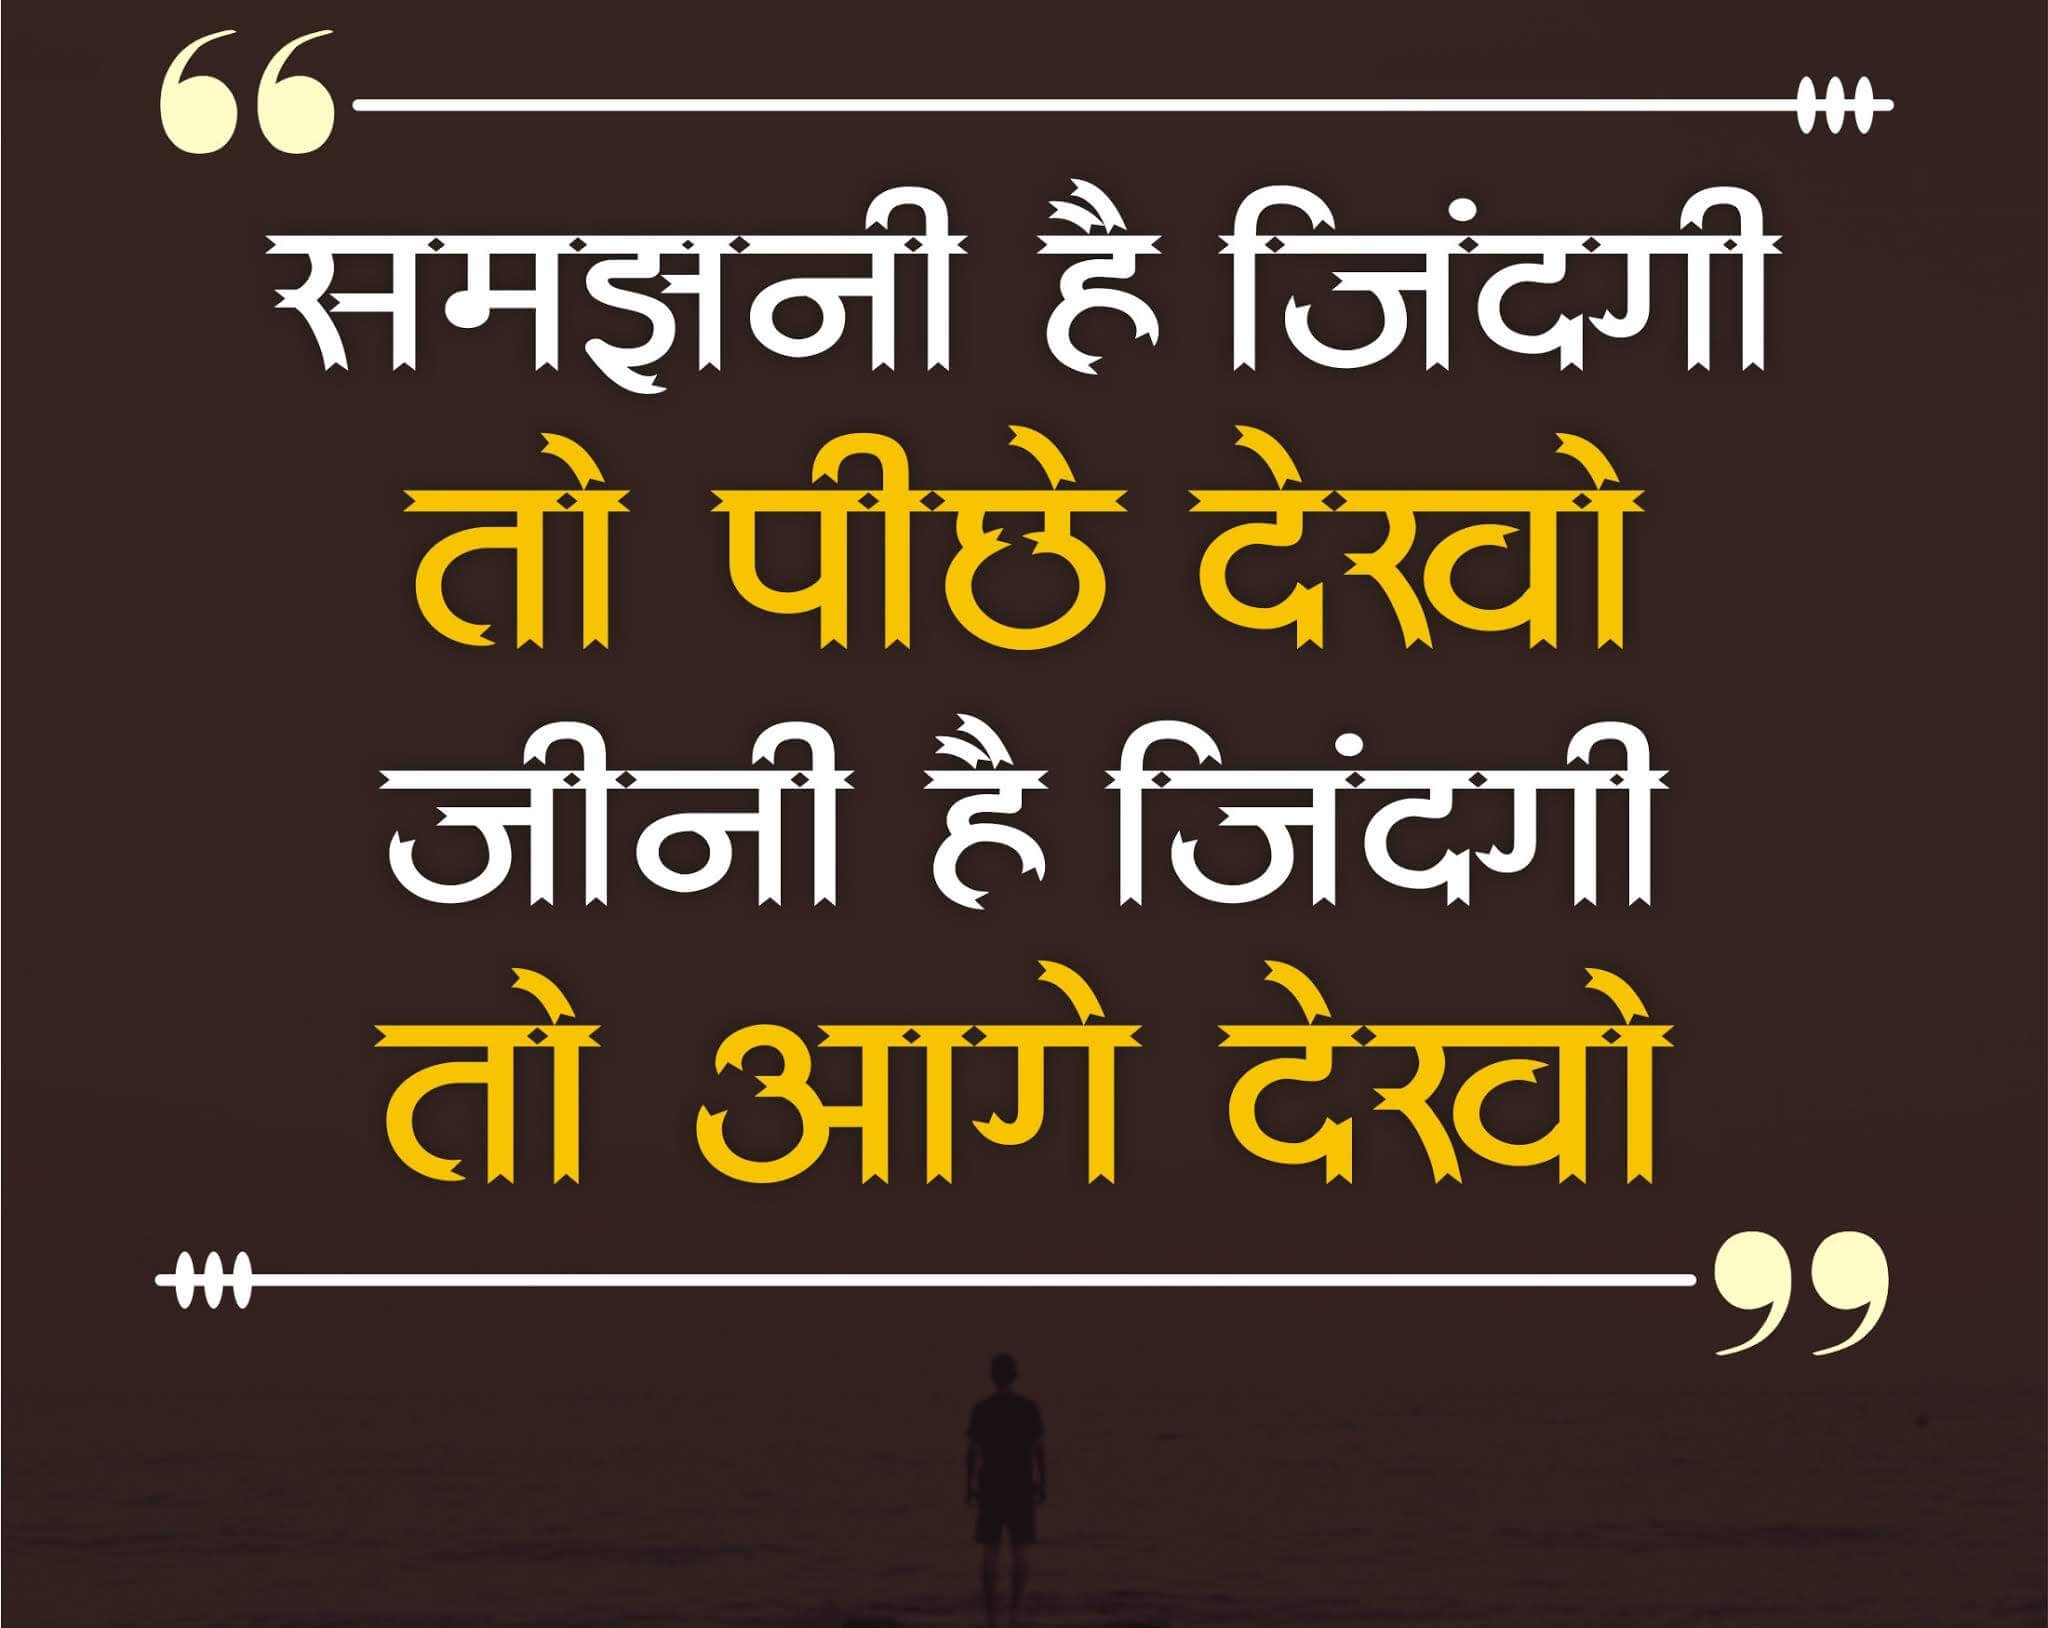 110 Hindi Motivational Quotes and Thoughts: हिन्दी मोटिवेशनल क्वोट्स और